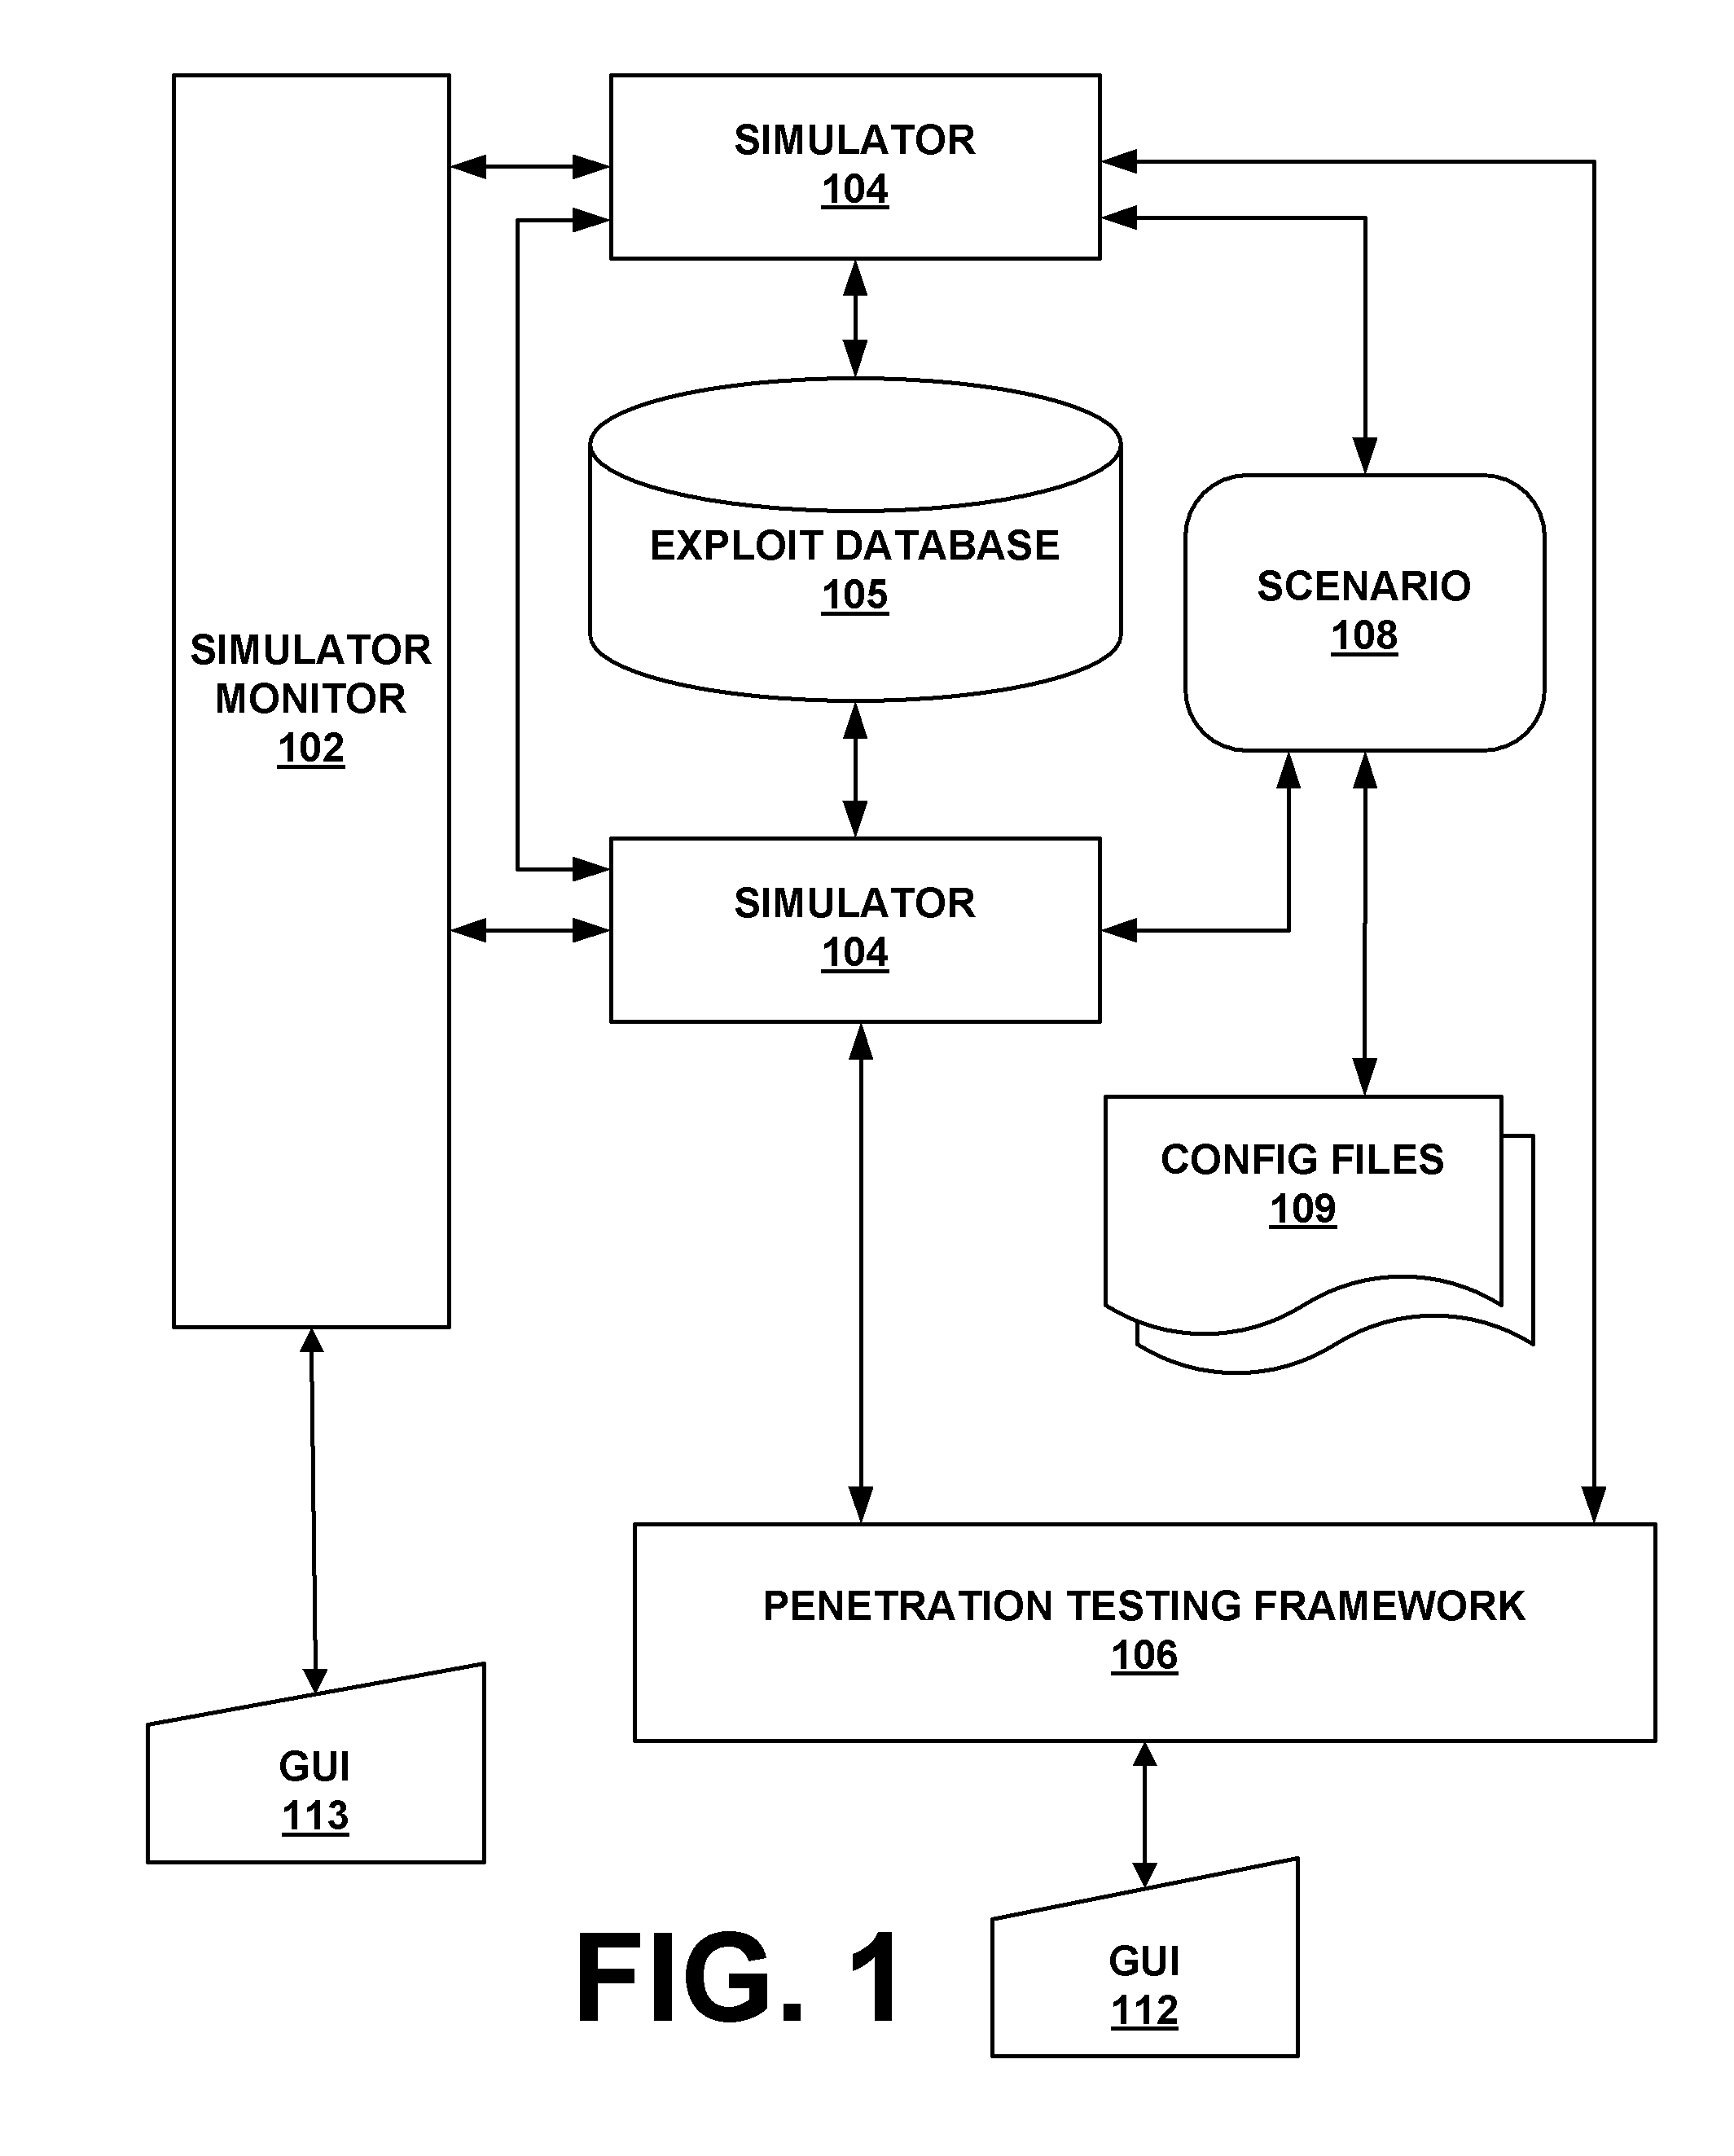 System and method for simulating computer network attacks